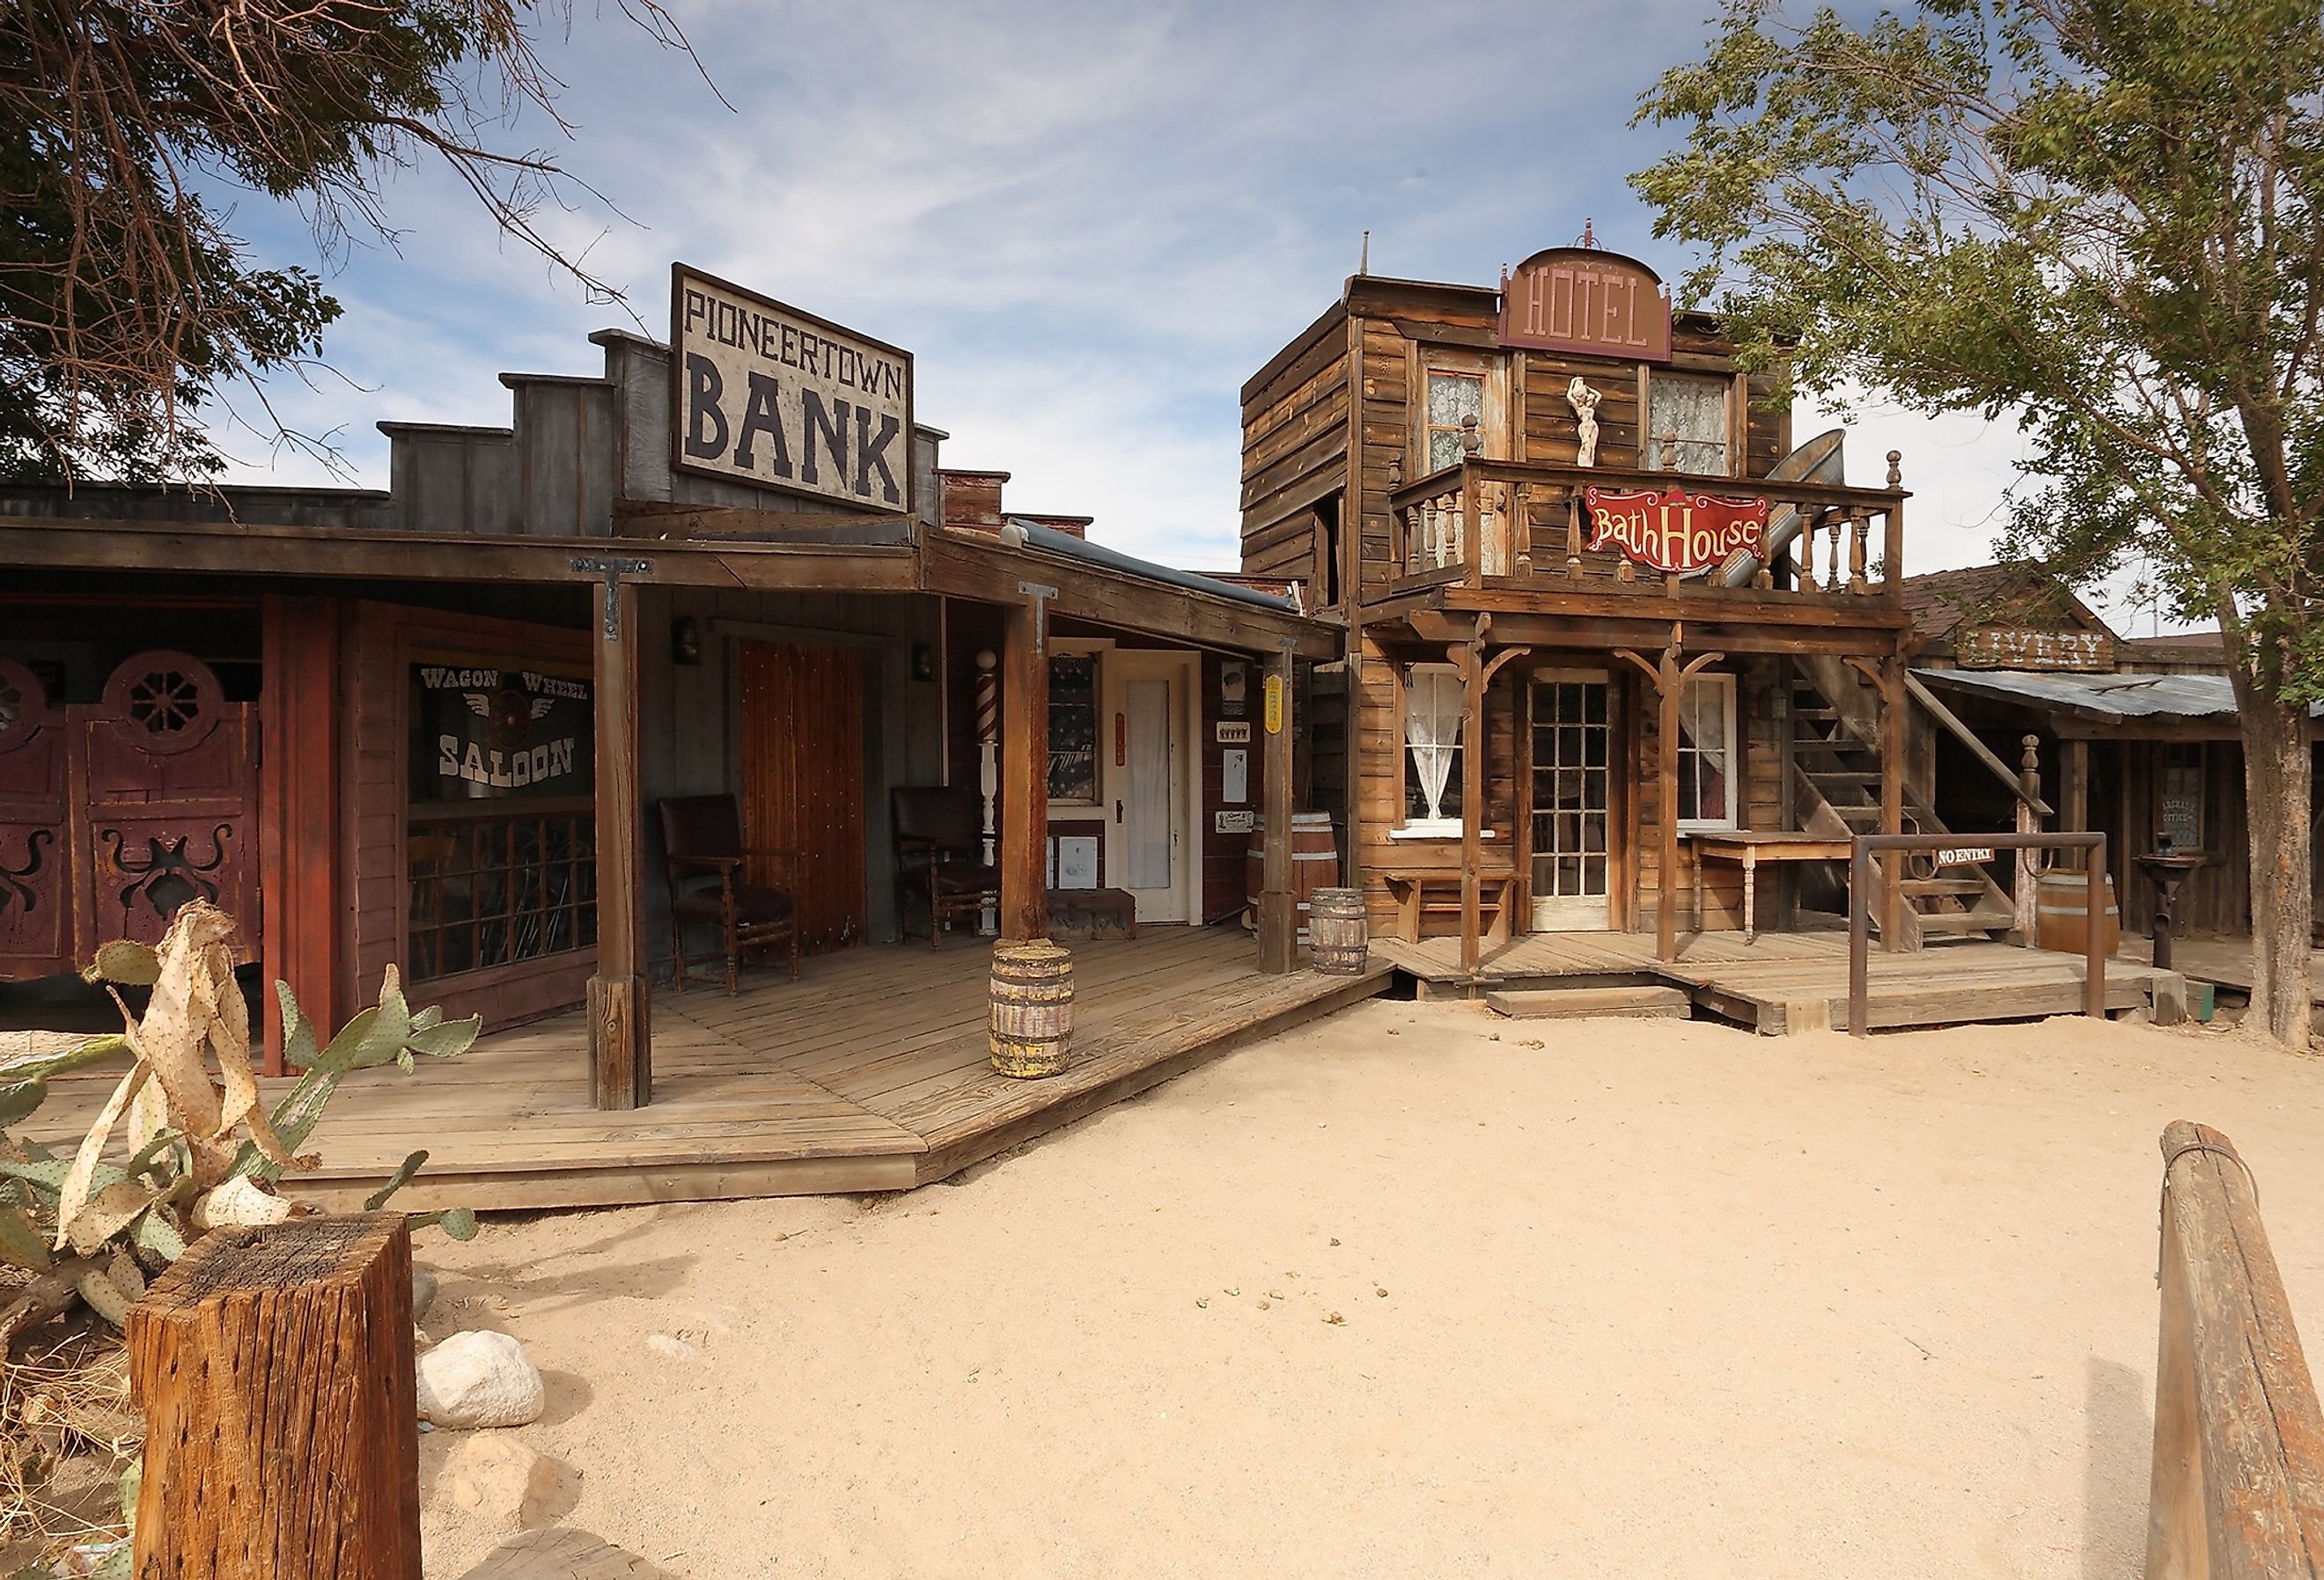 Pioneertown, California saloon and bath house. Mfield, Matthew Field, http://www.photography.mattfield.com, CC BY-SA 3.0 <http://creativecommons.org/licenses/by-sa/3.0/>, via Wikimedia Commons